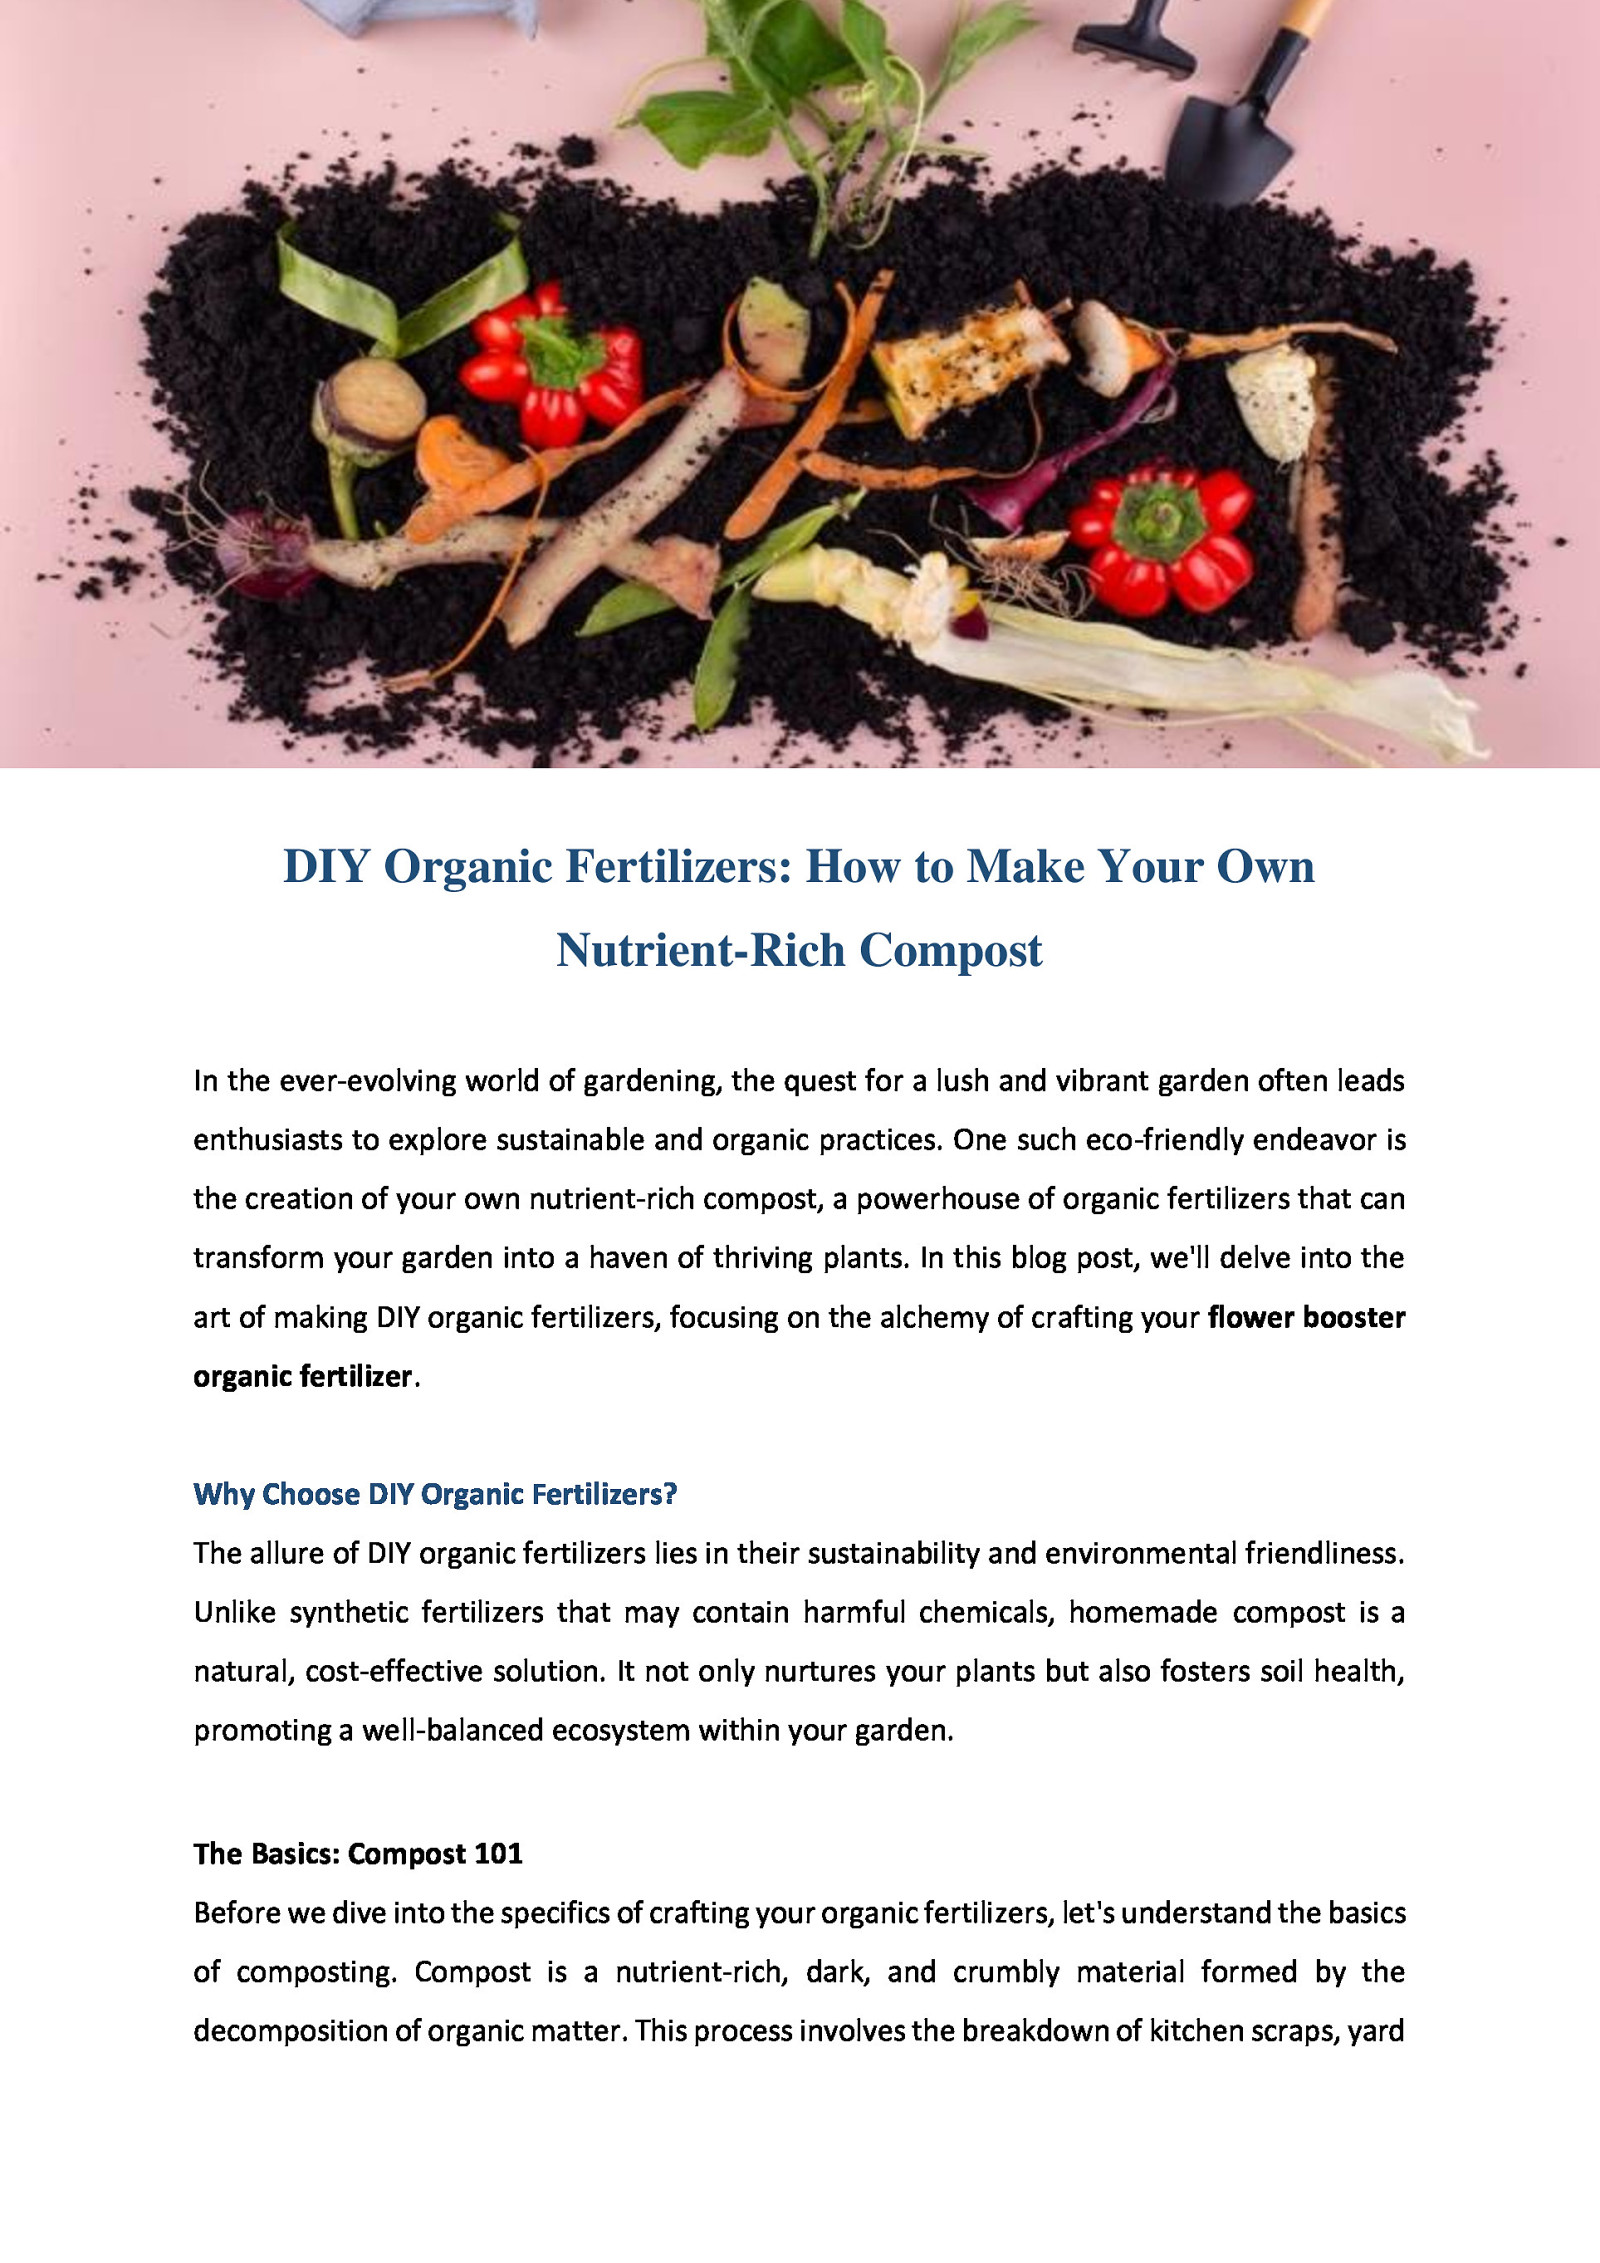 DIY Organic Fertilizers: How to Make Your Own Nutrient-Rich Compost